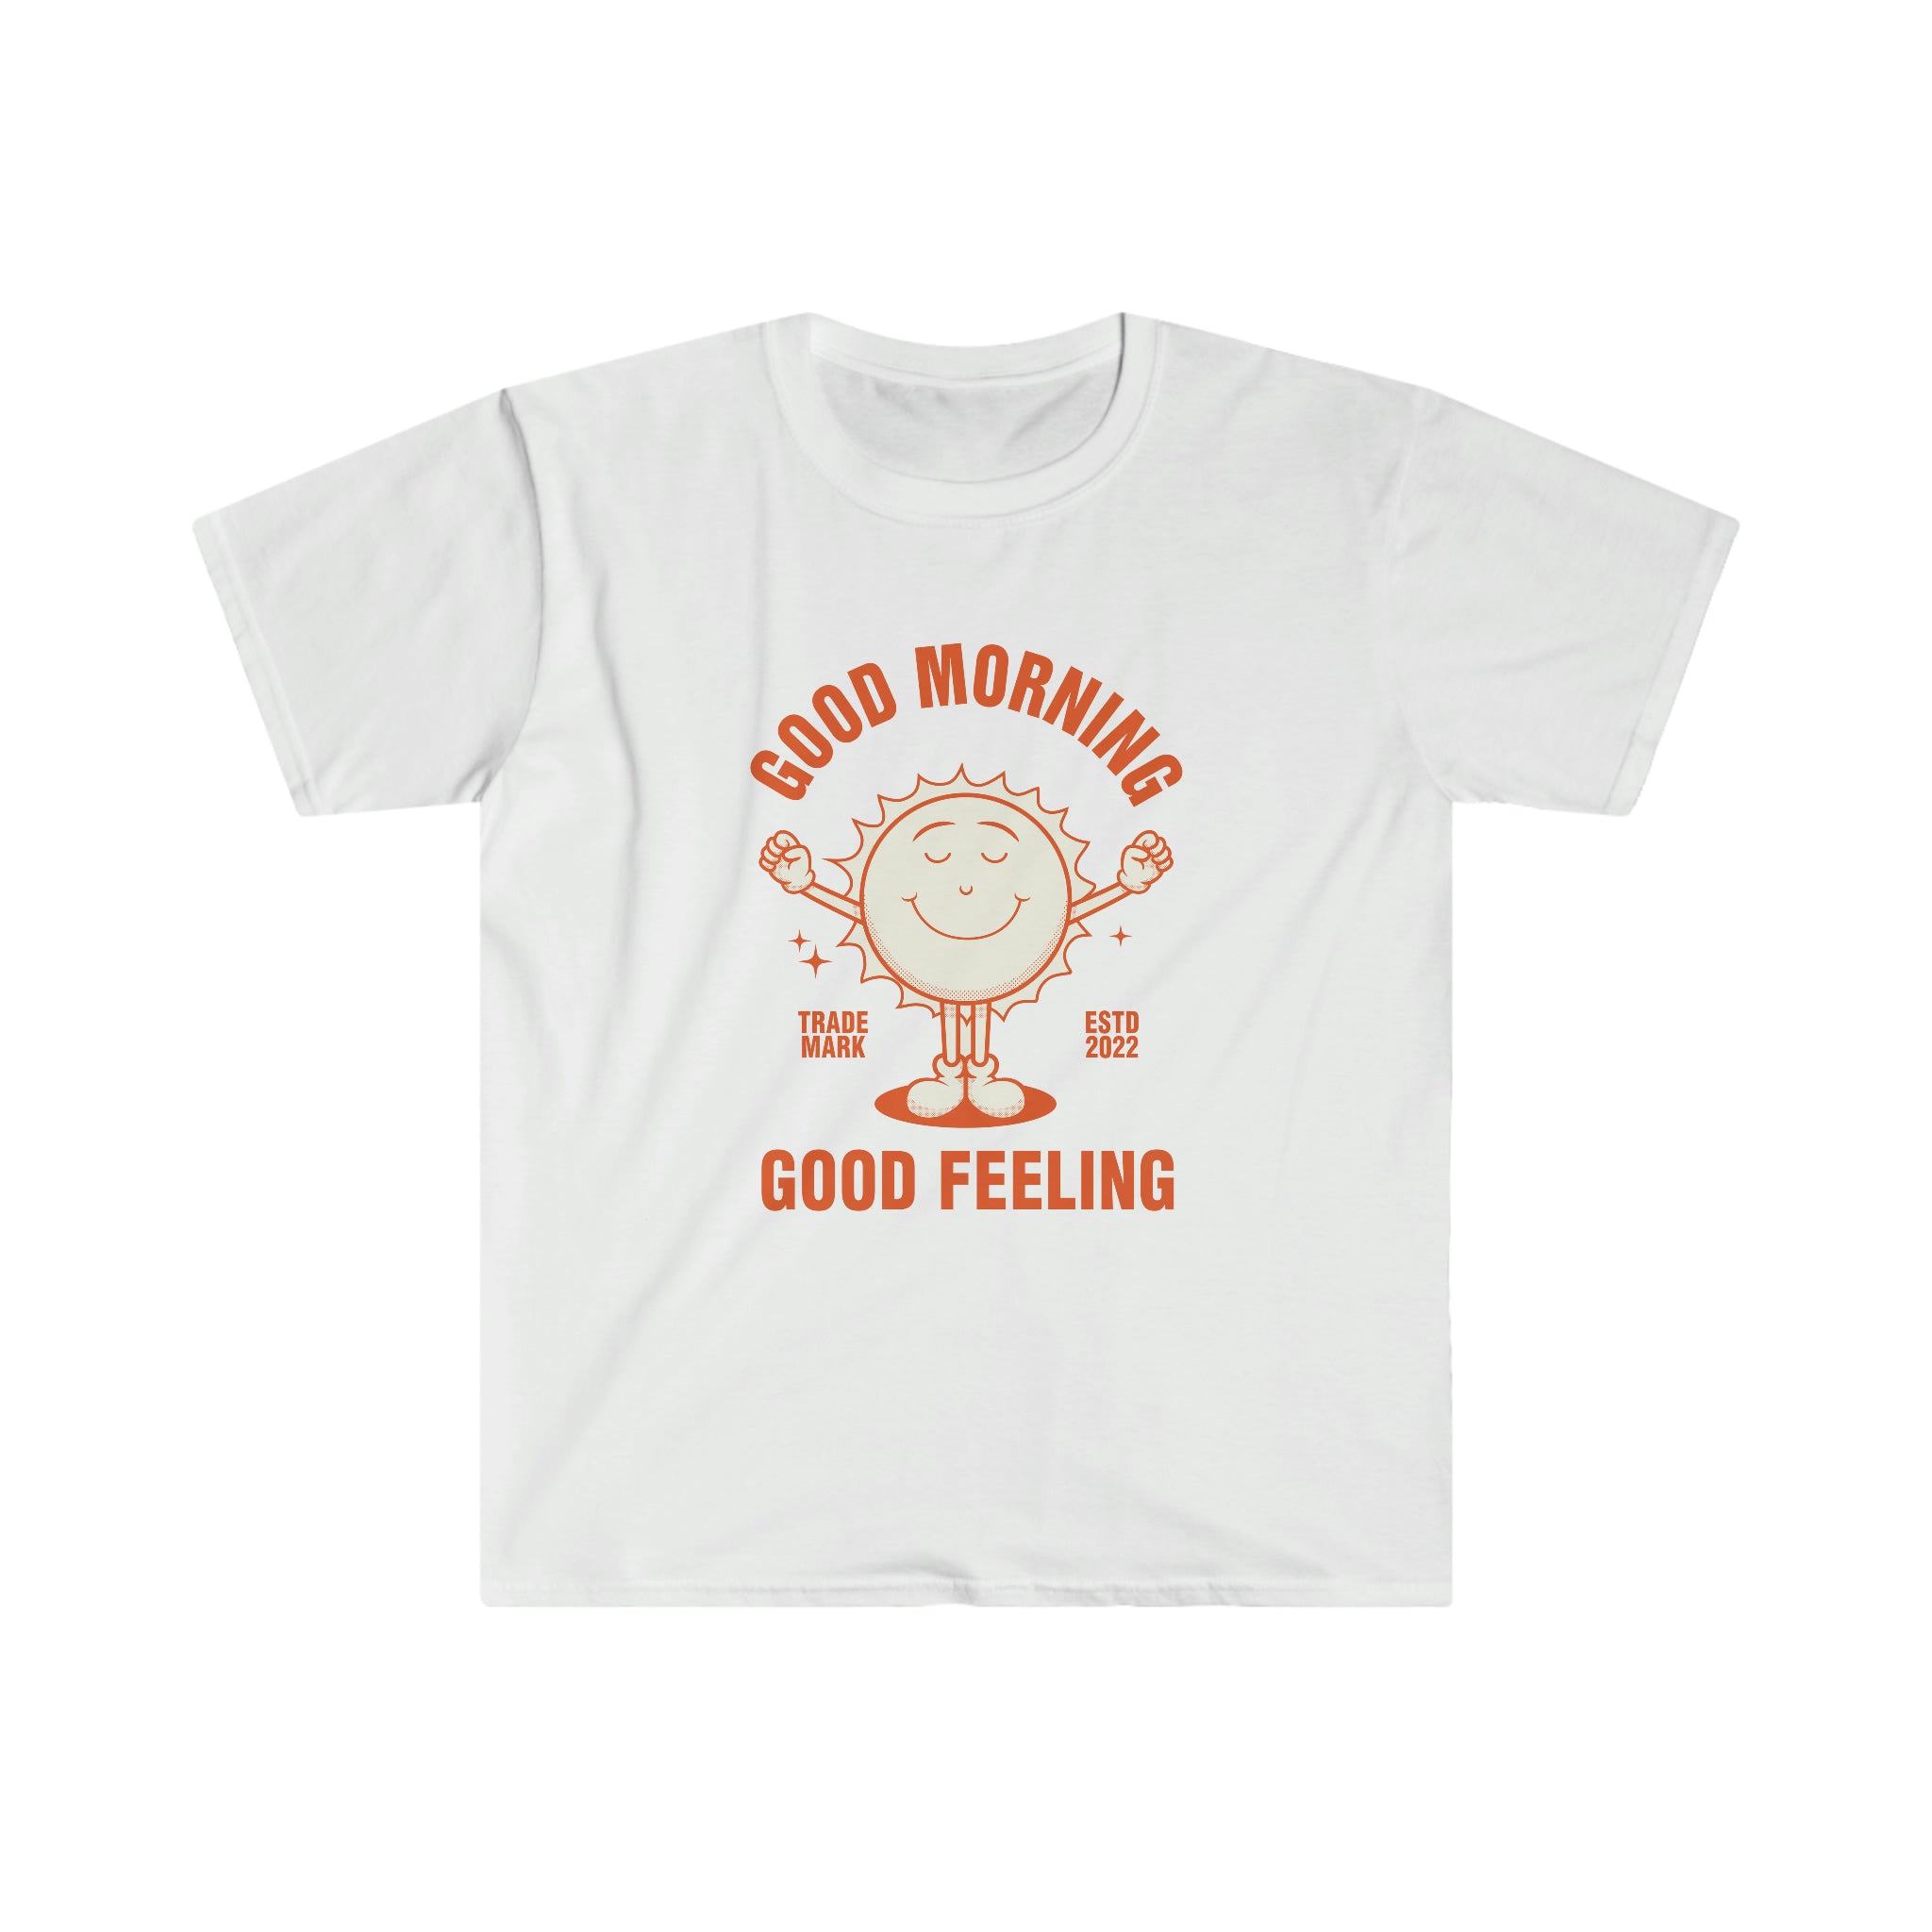 A white Good Morning Good Feelings T-shirt with orange text that will bring good feelings.